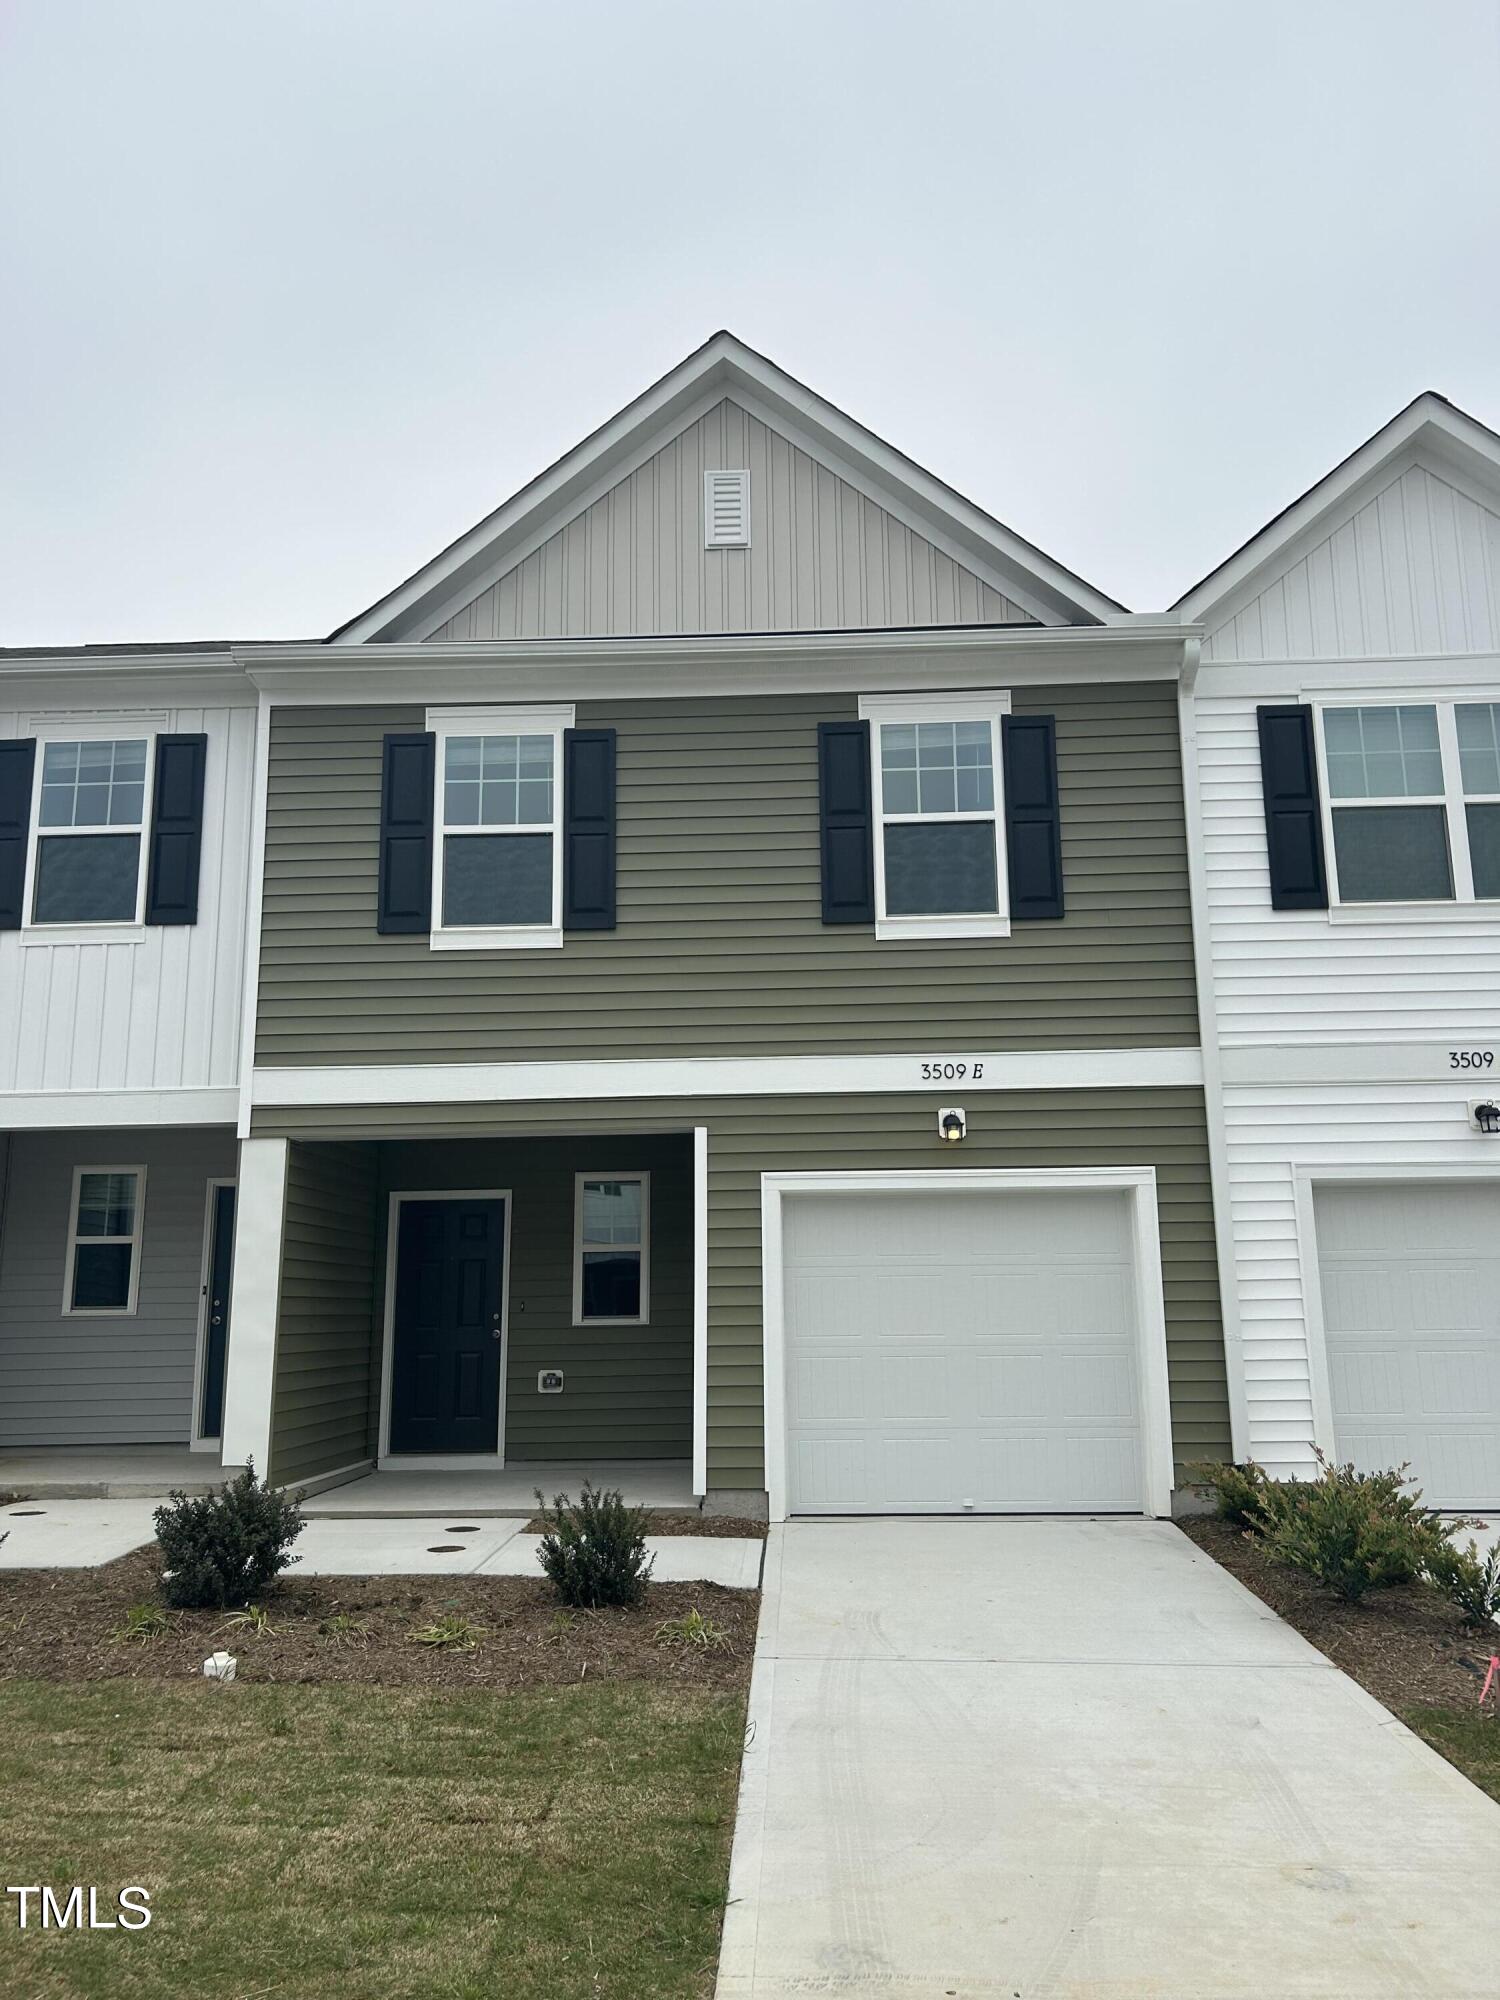 View Wilson, NC 27893 townhome